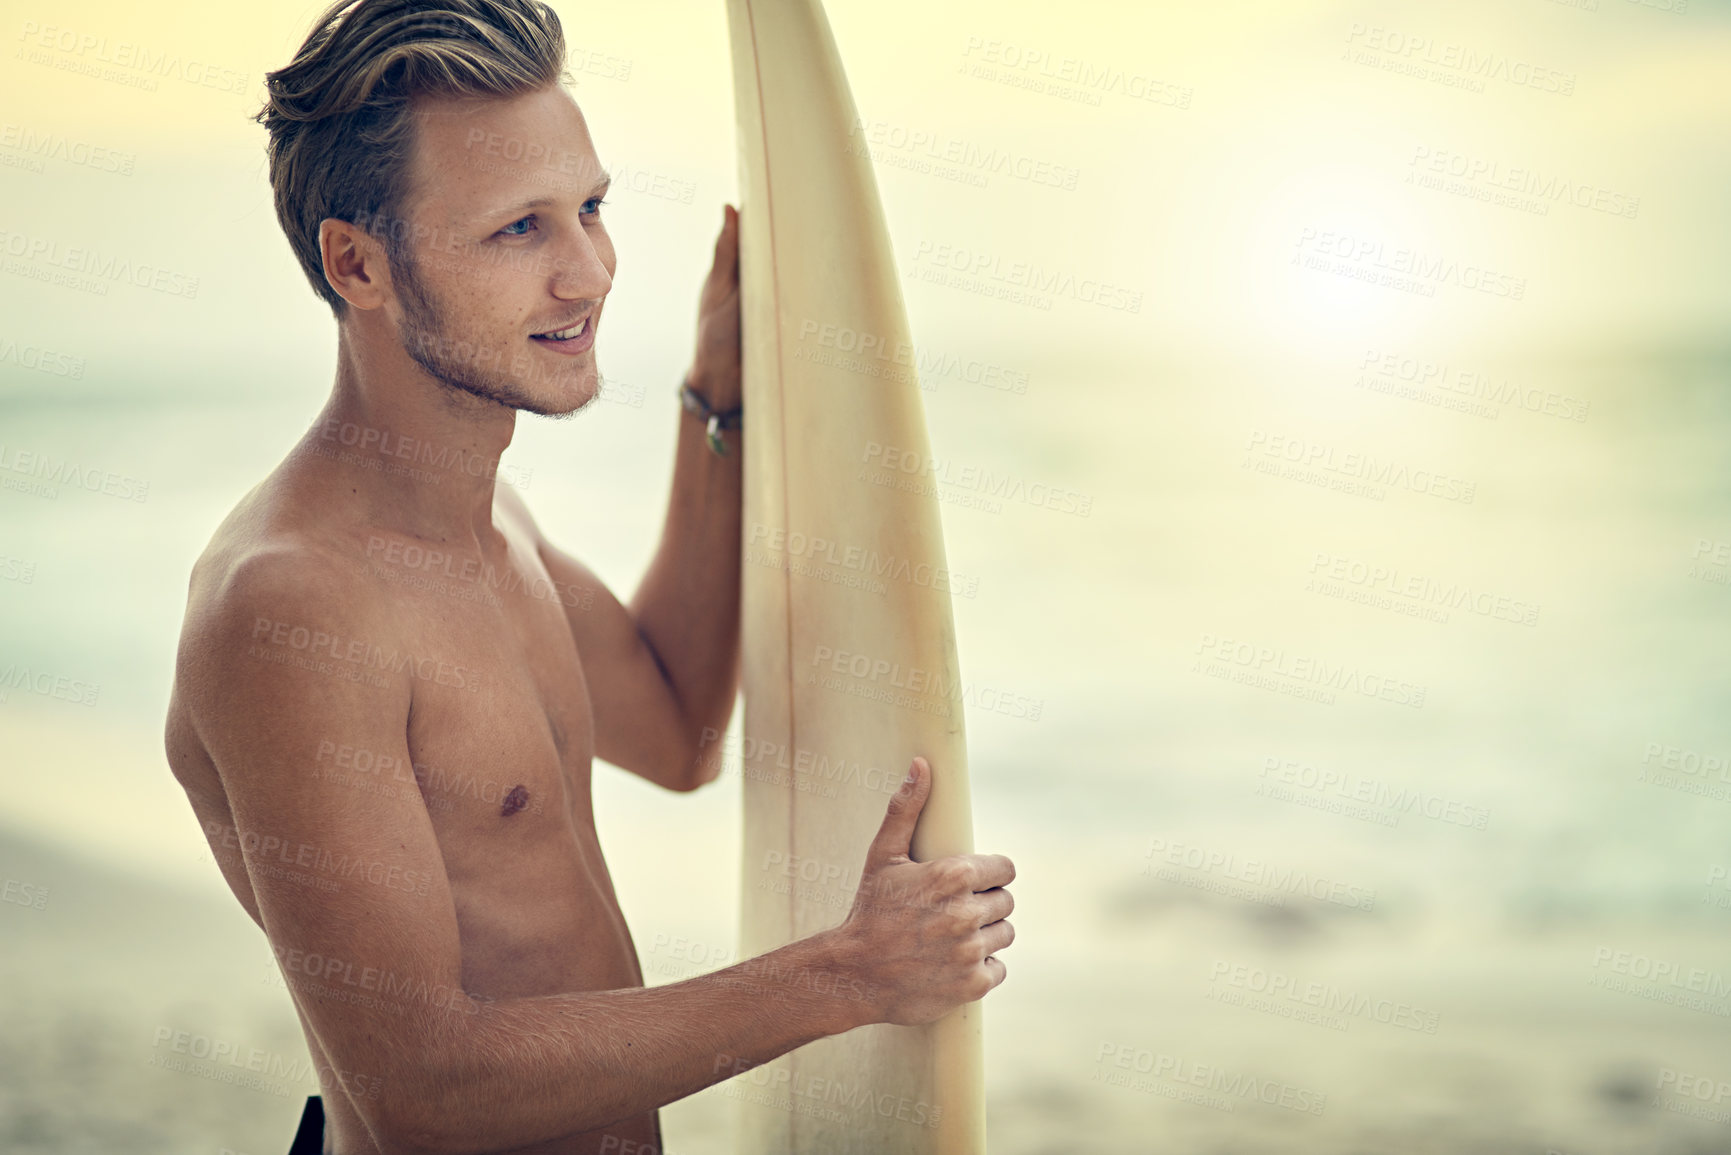 Buy stock photo Shot of a shirtless young surfer watching the waves while holding his surfboard at the beach